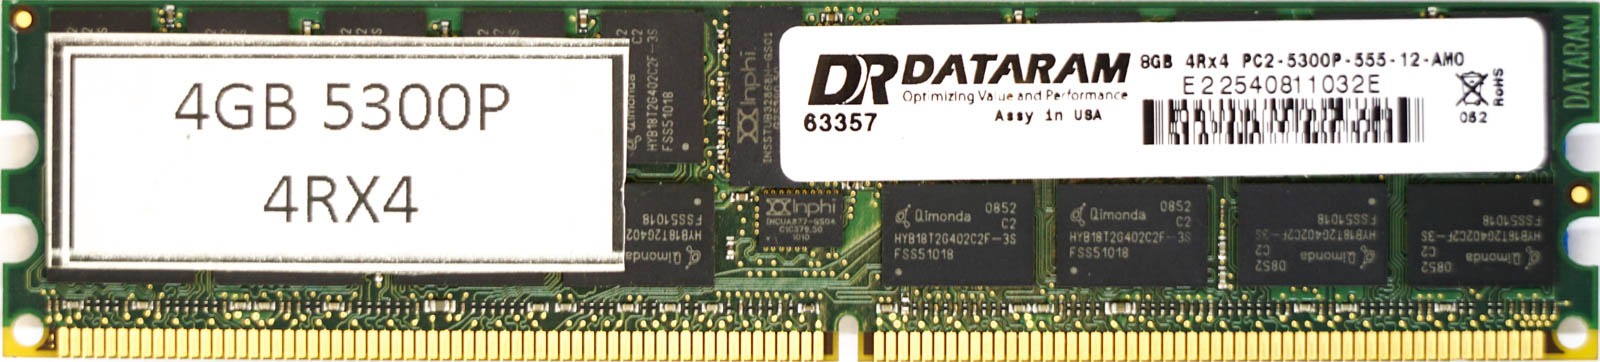 Unbranded - 4GB PC2-5300P (DDR2-667Mhz, 4RX4)